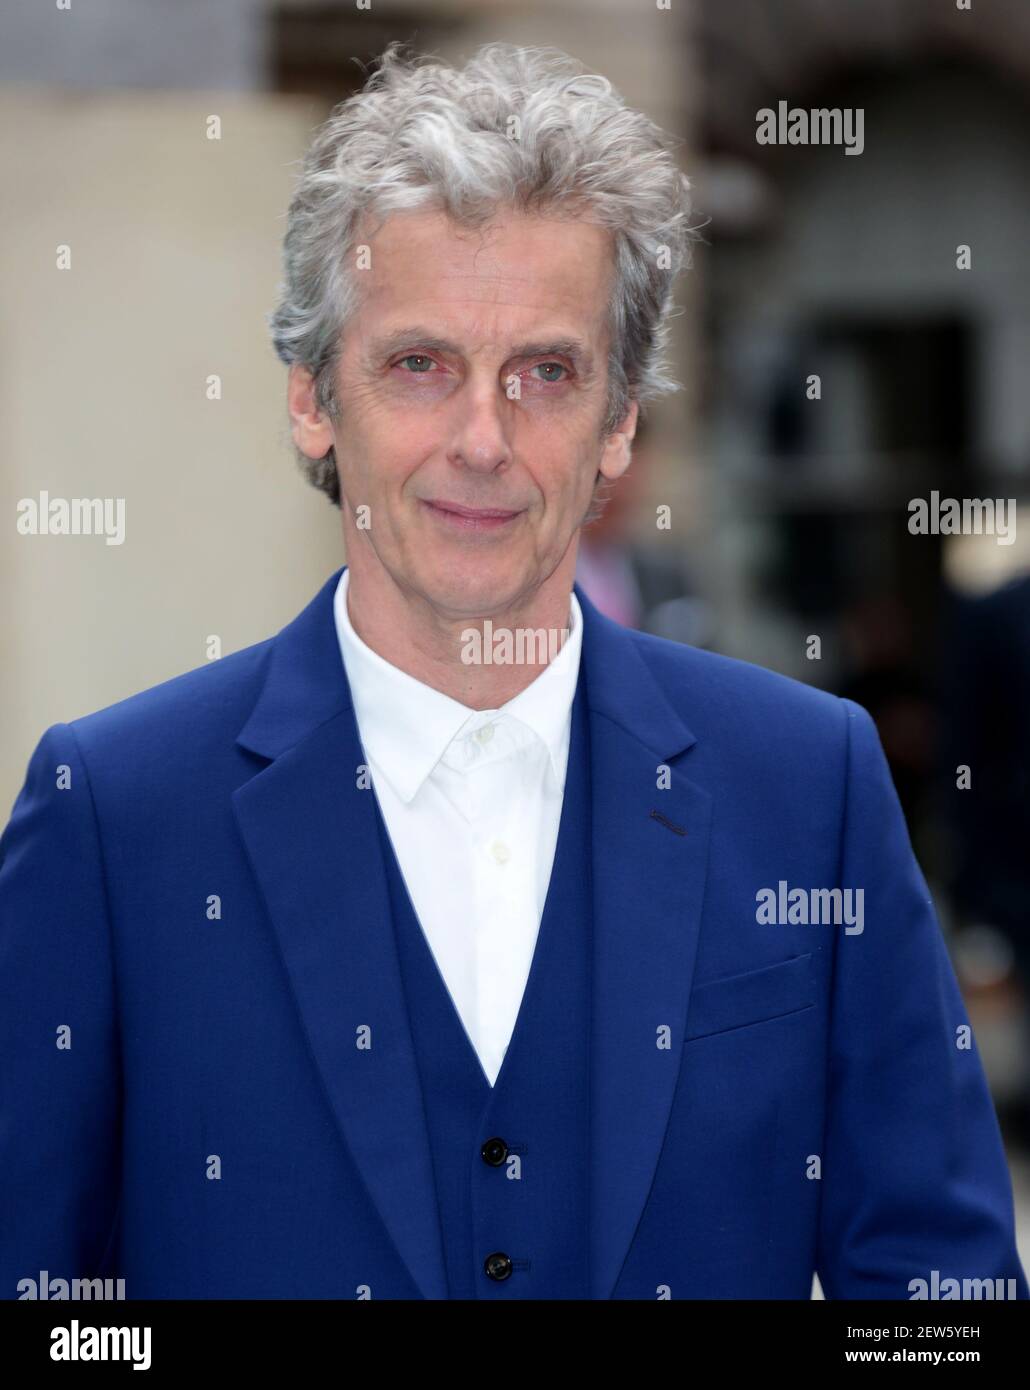 04 giugno 2019 - Londra, Inghilterra, UK - Royal Academy of Arts Summer Exhibition 2019 Party Photo Shows: Peter Capaldi Foto Stock